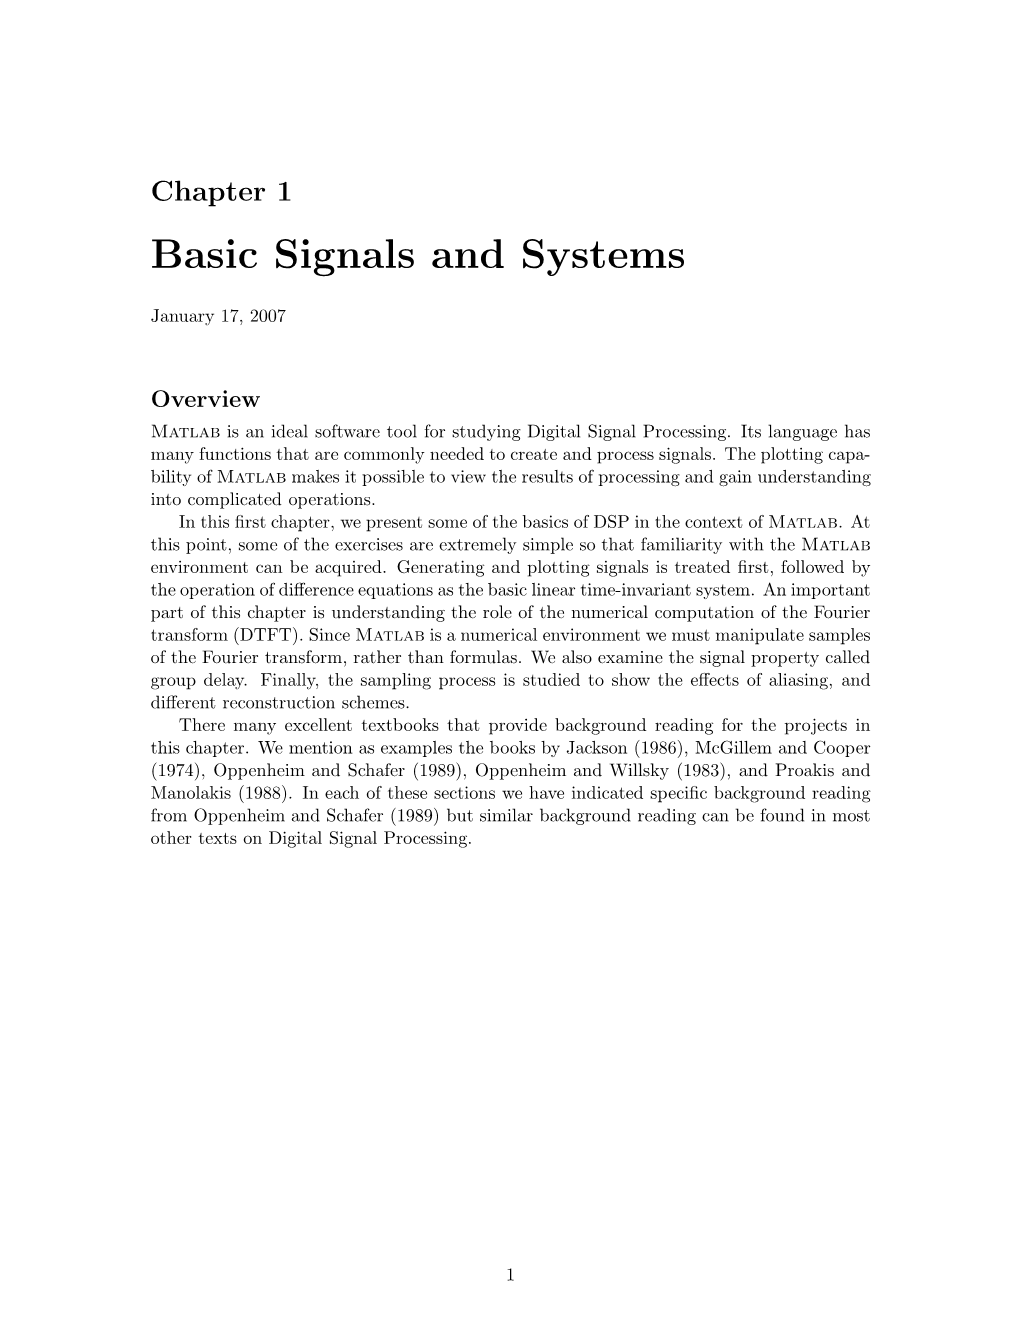 Basic Signals and Systems